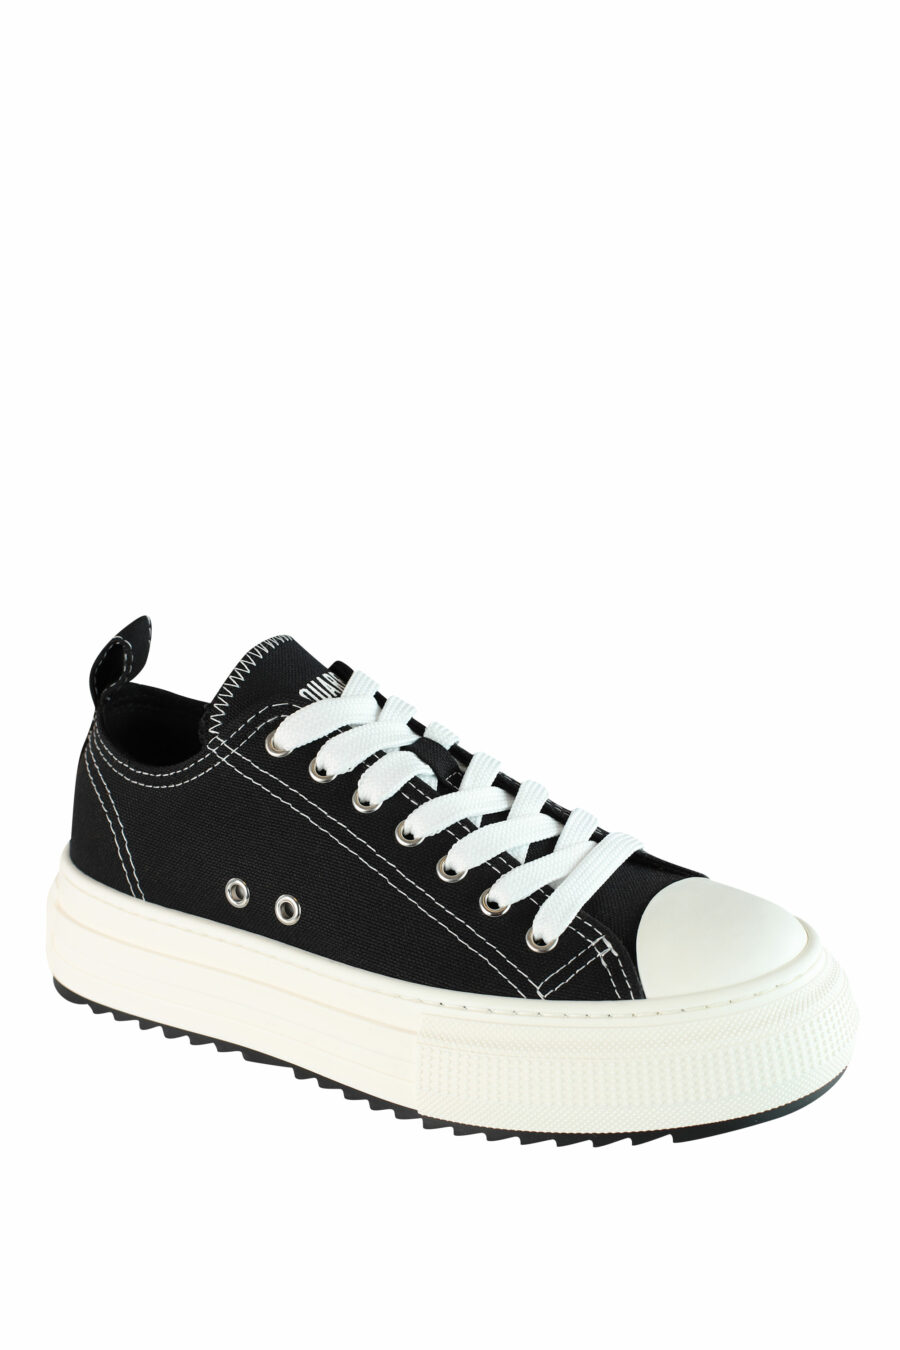 Black "berlin" trainers with platform and white mini-logo - IMG 1382